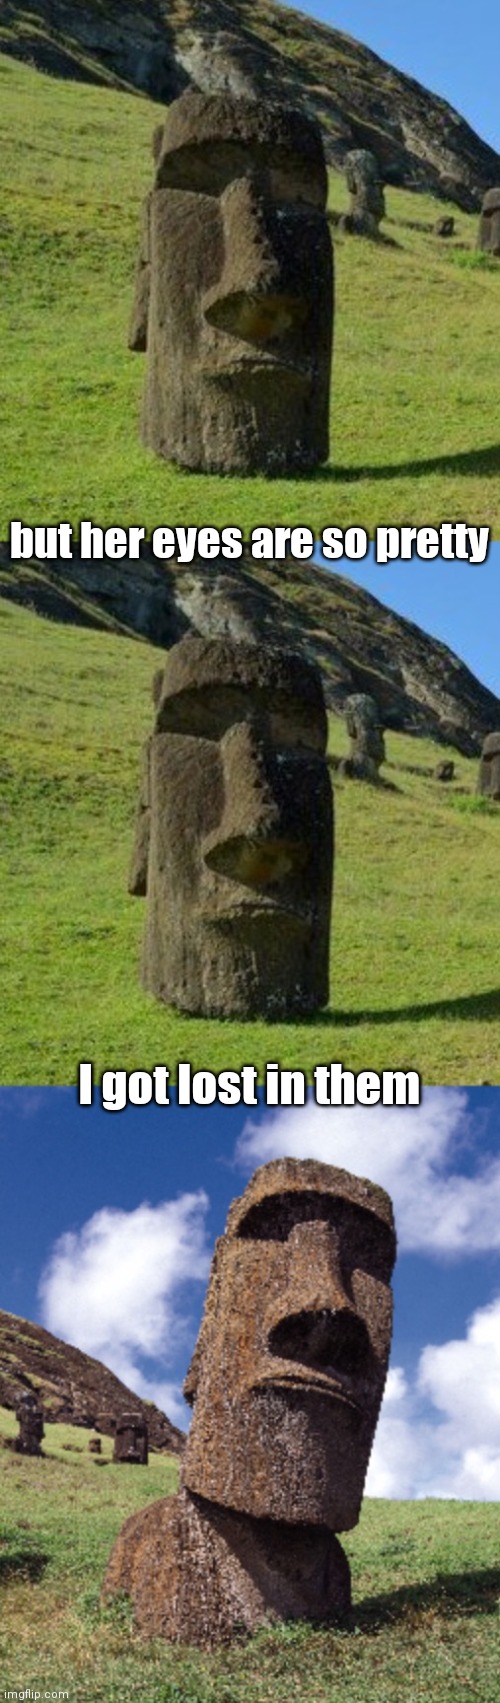 Bad Pun Moai | but her eyes are so pretty I got lost in them | image tagged in bad pun moai | made w/ Imgflip meme maker